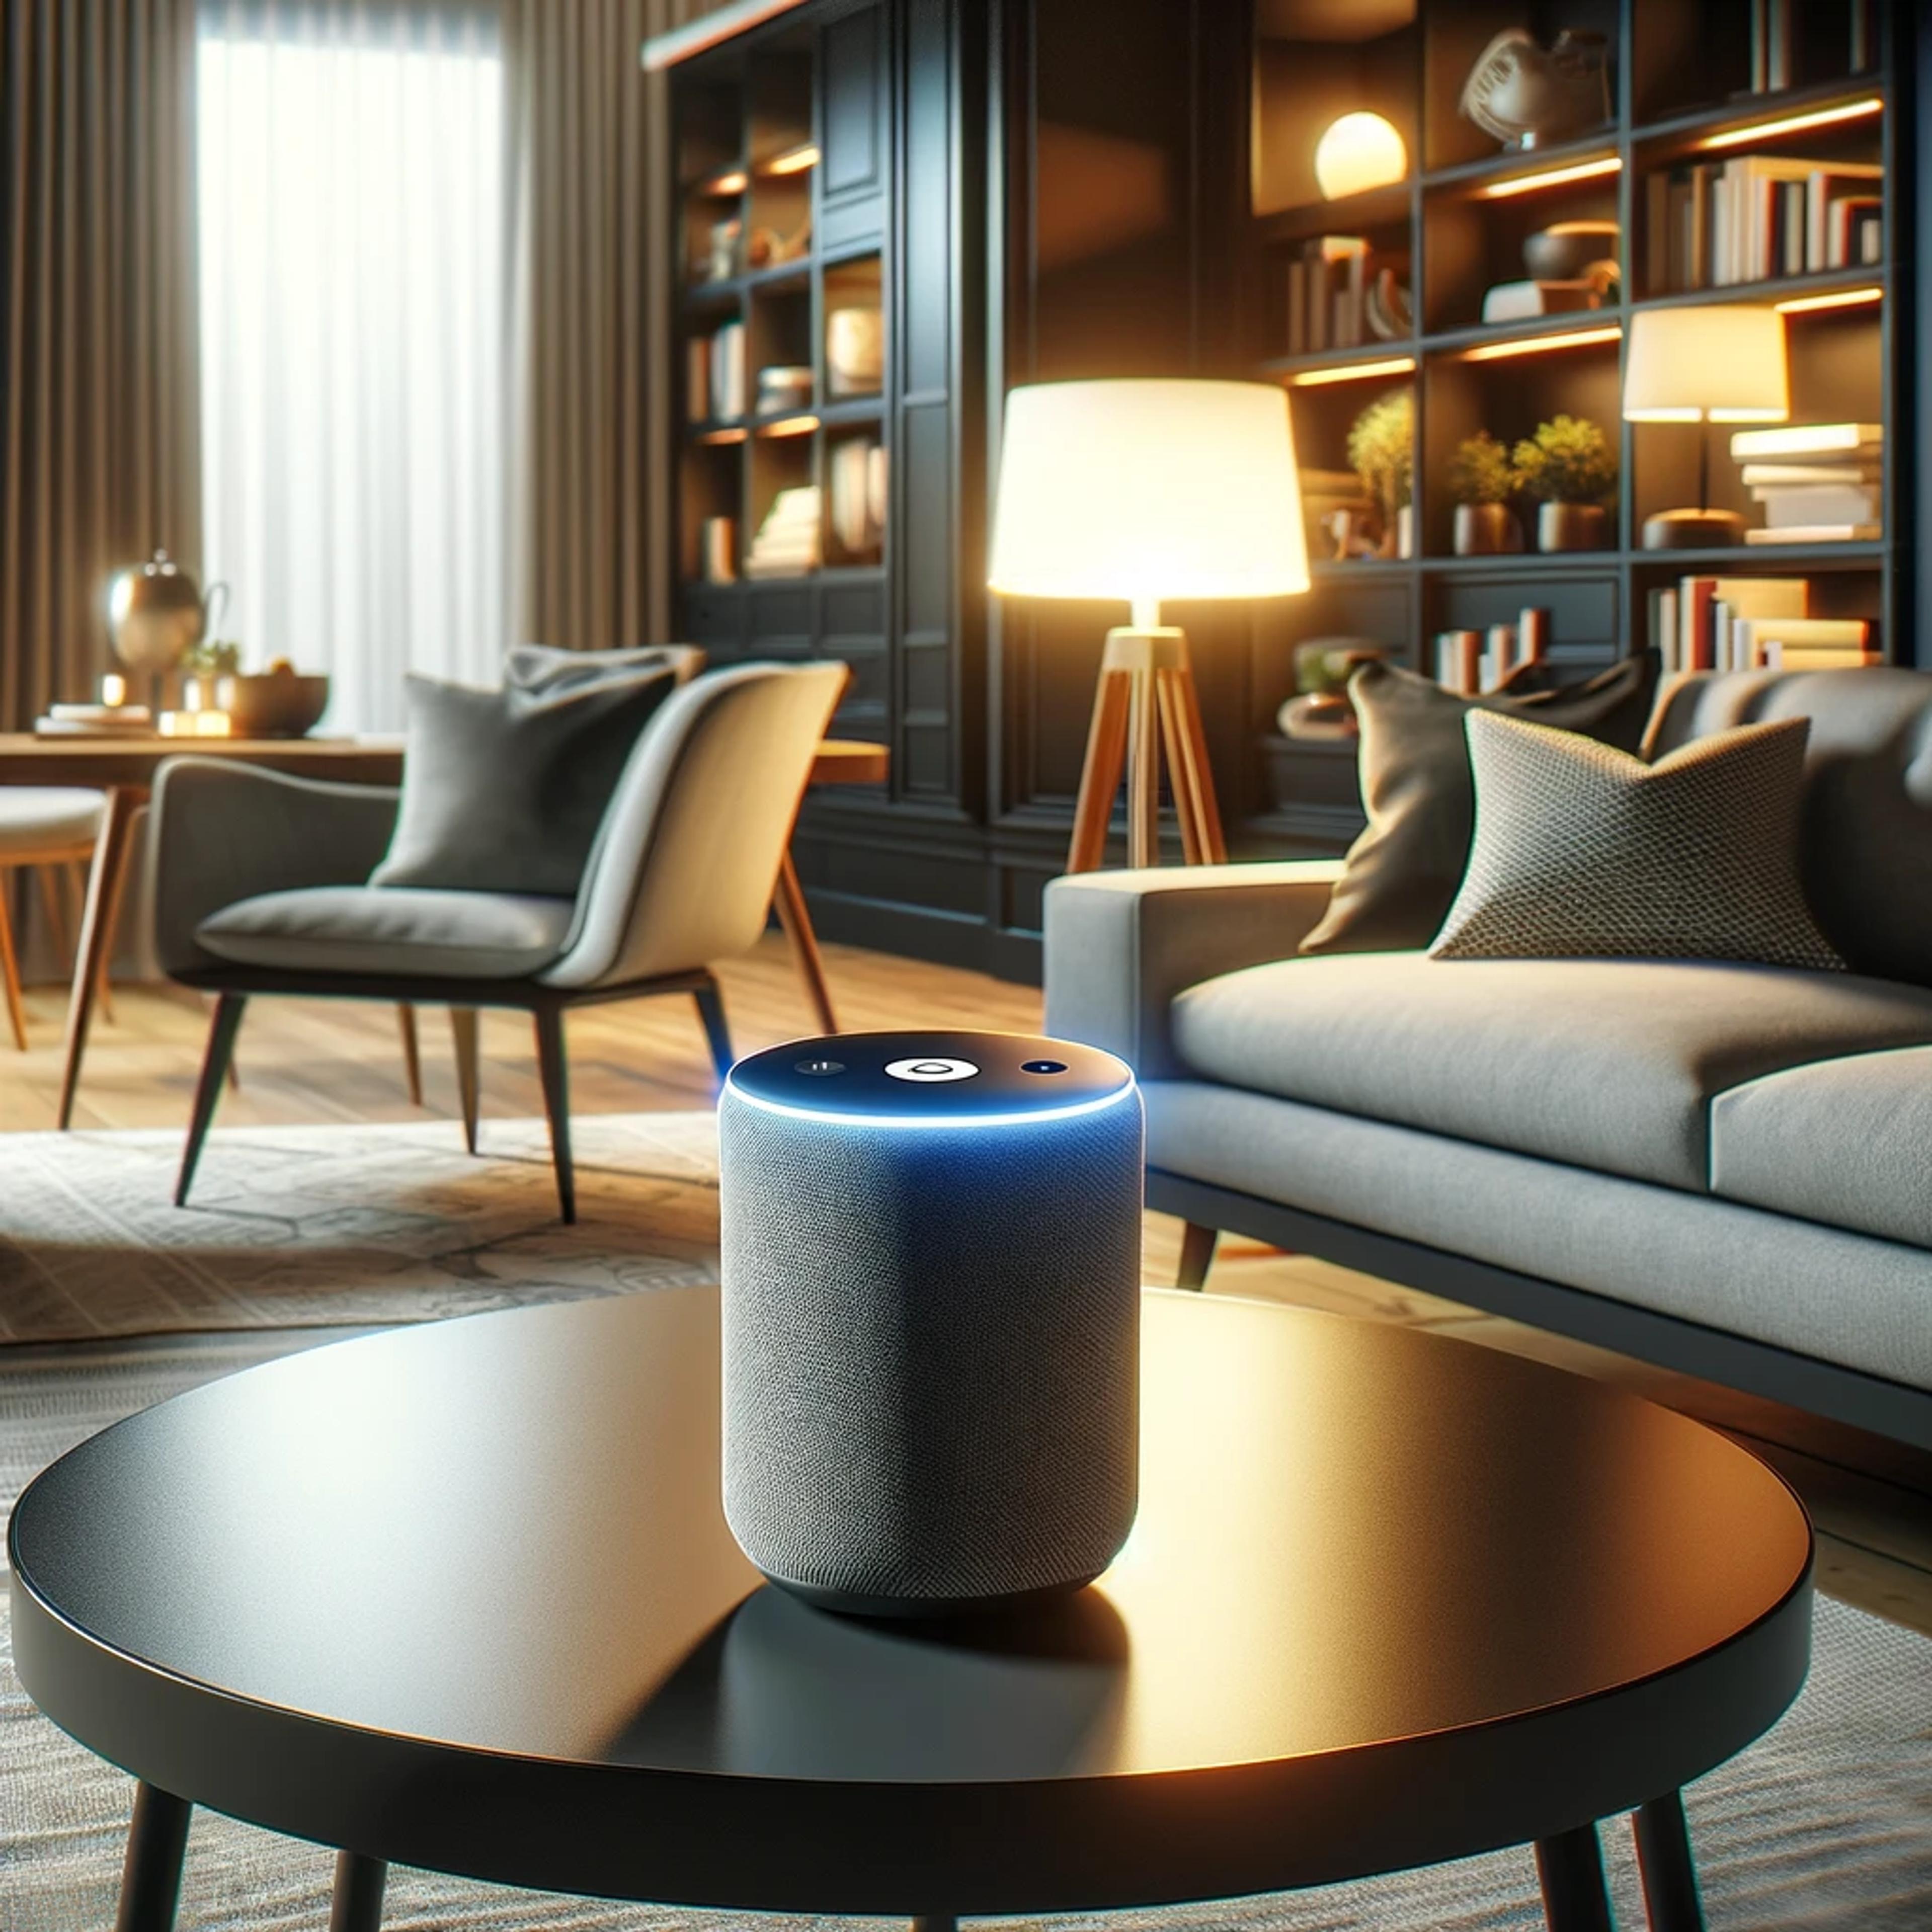 Amazon Alexa home pod placed on a coffee table in a living room